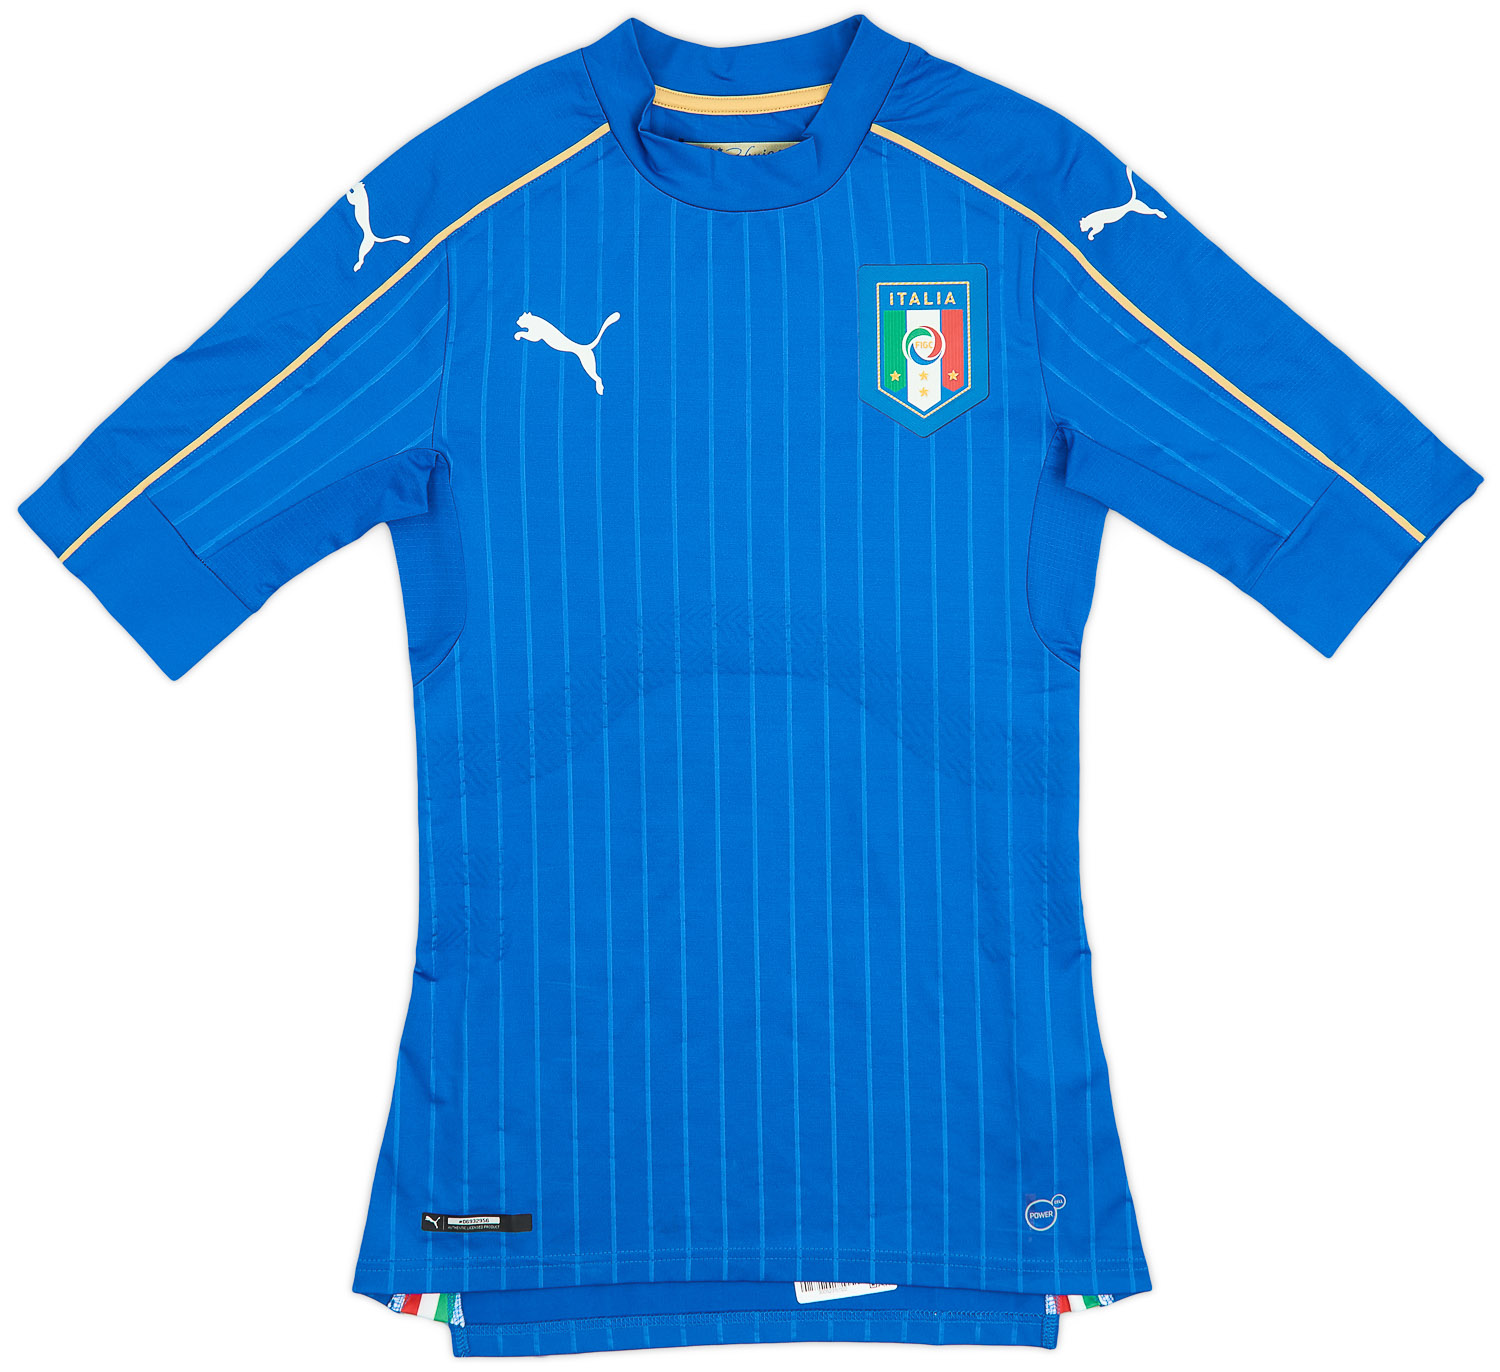 2016-17 Italy Authentic Home Shirt - 9/10 - ()